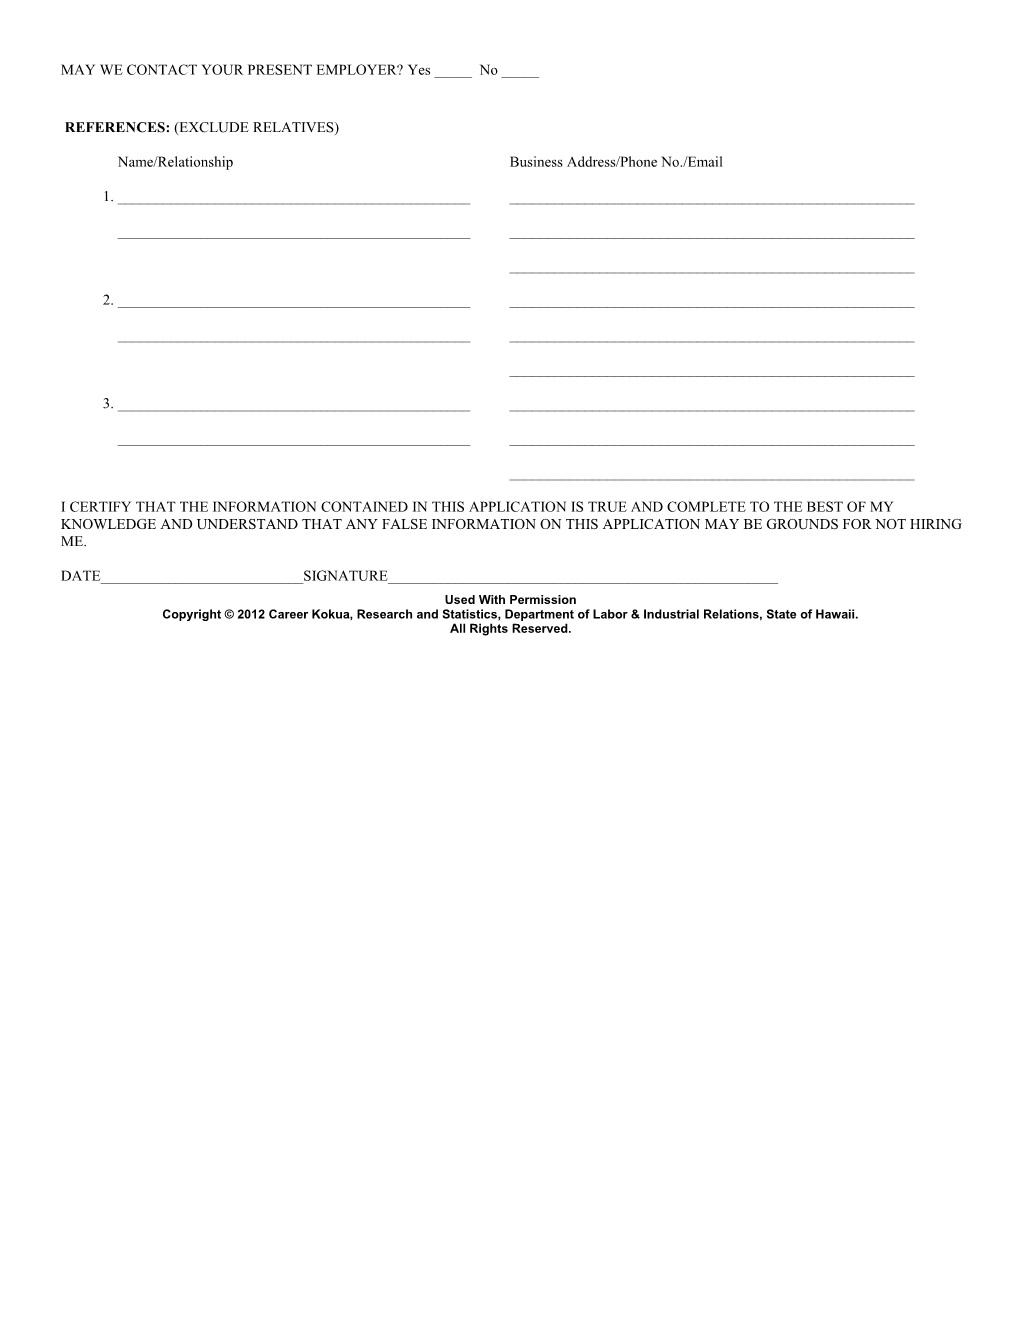 This Form Includes Almost Everything You Might Find on a Company Application